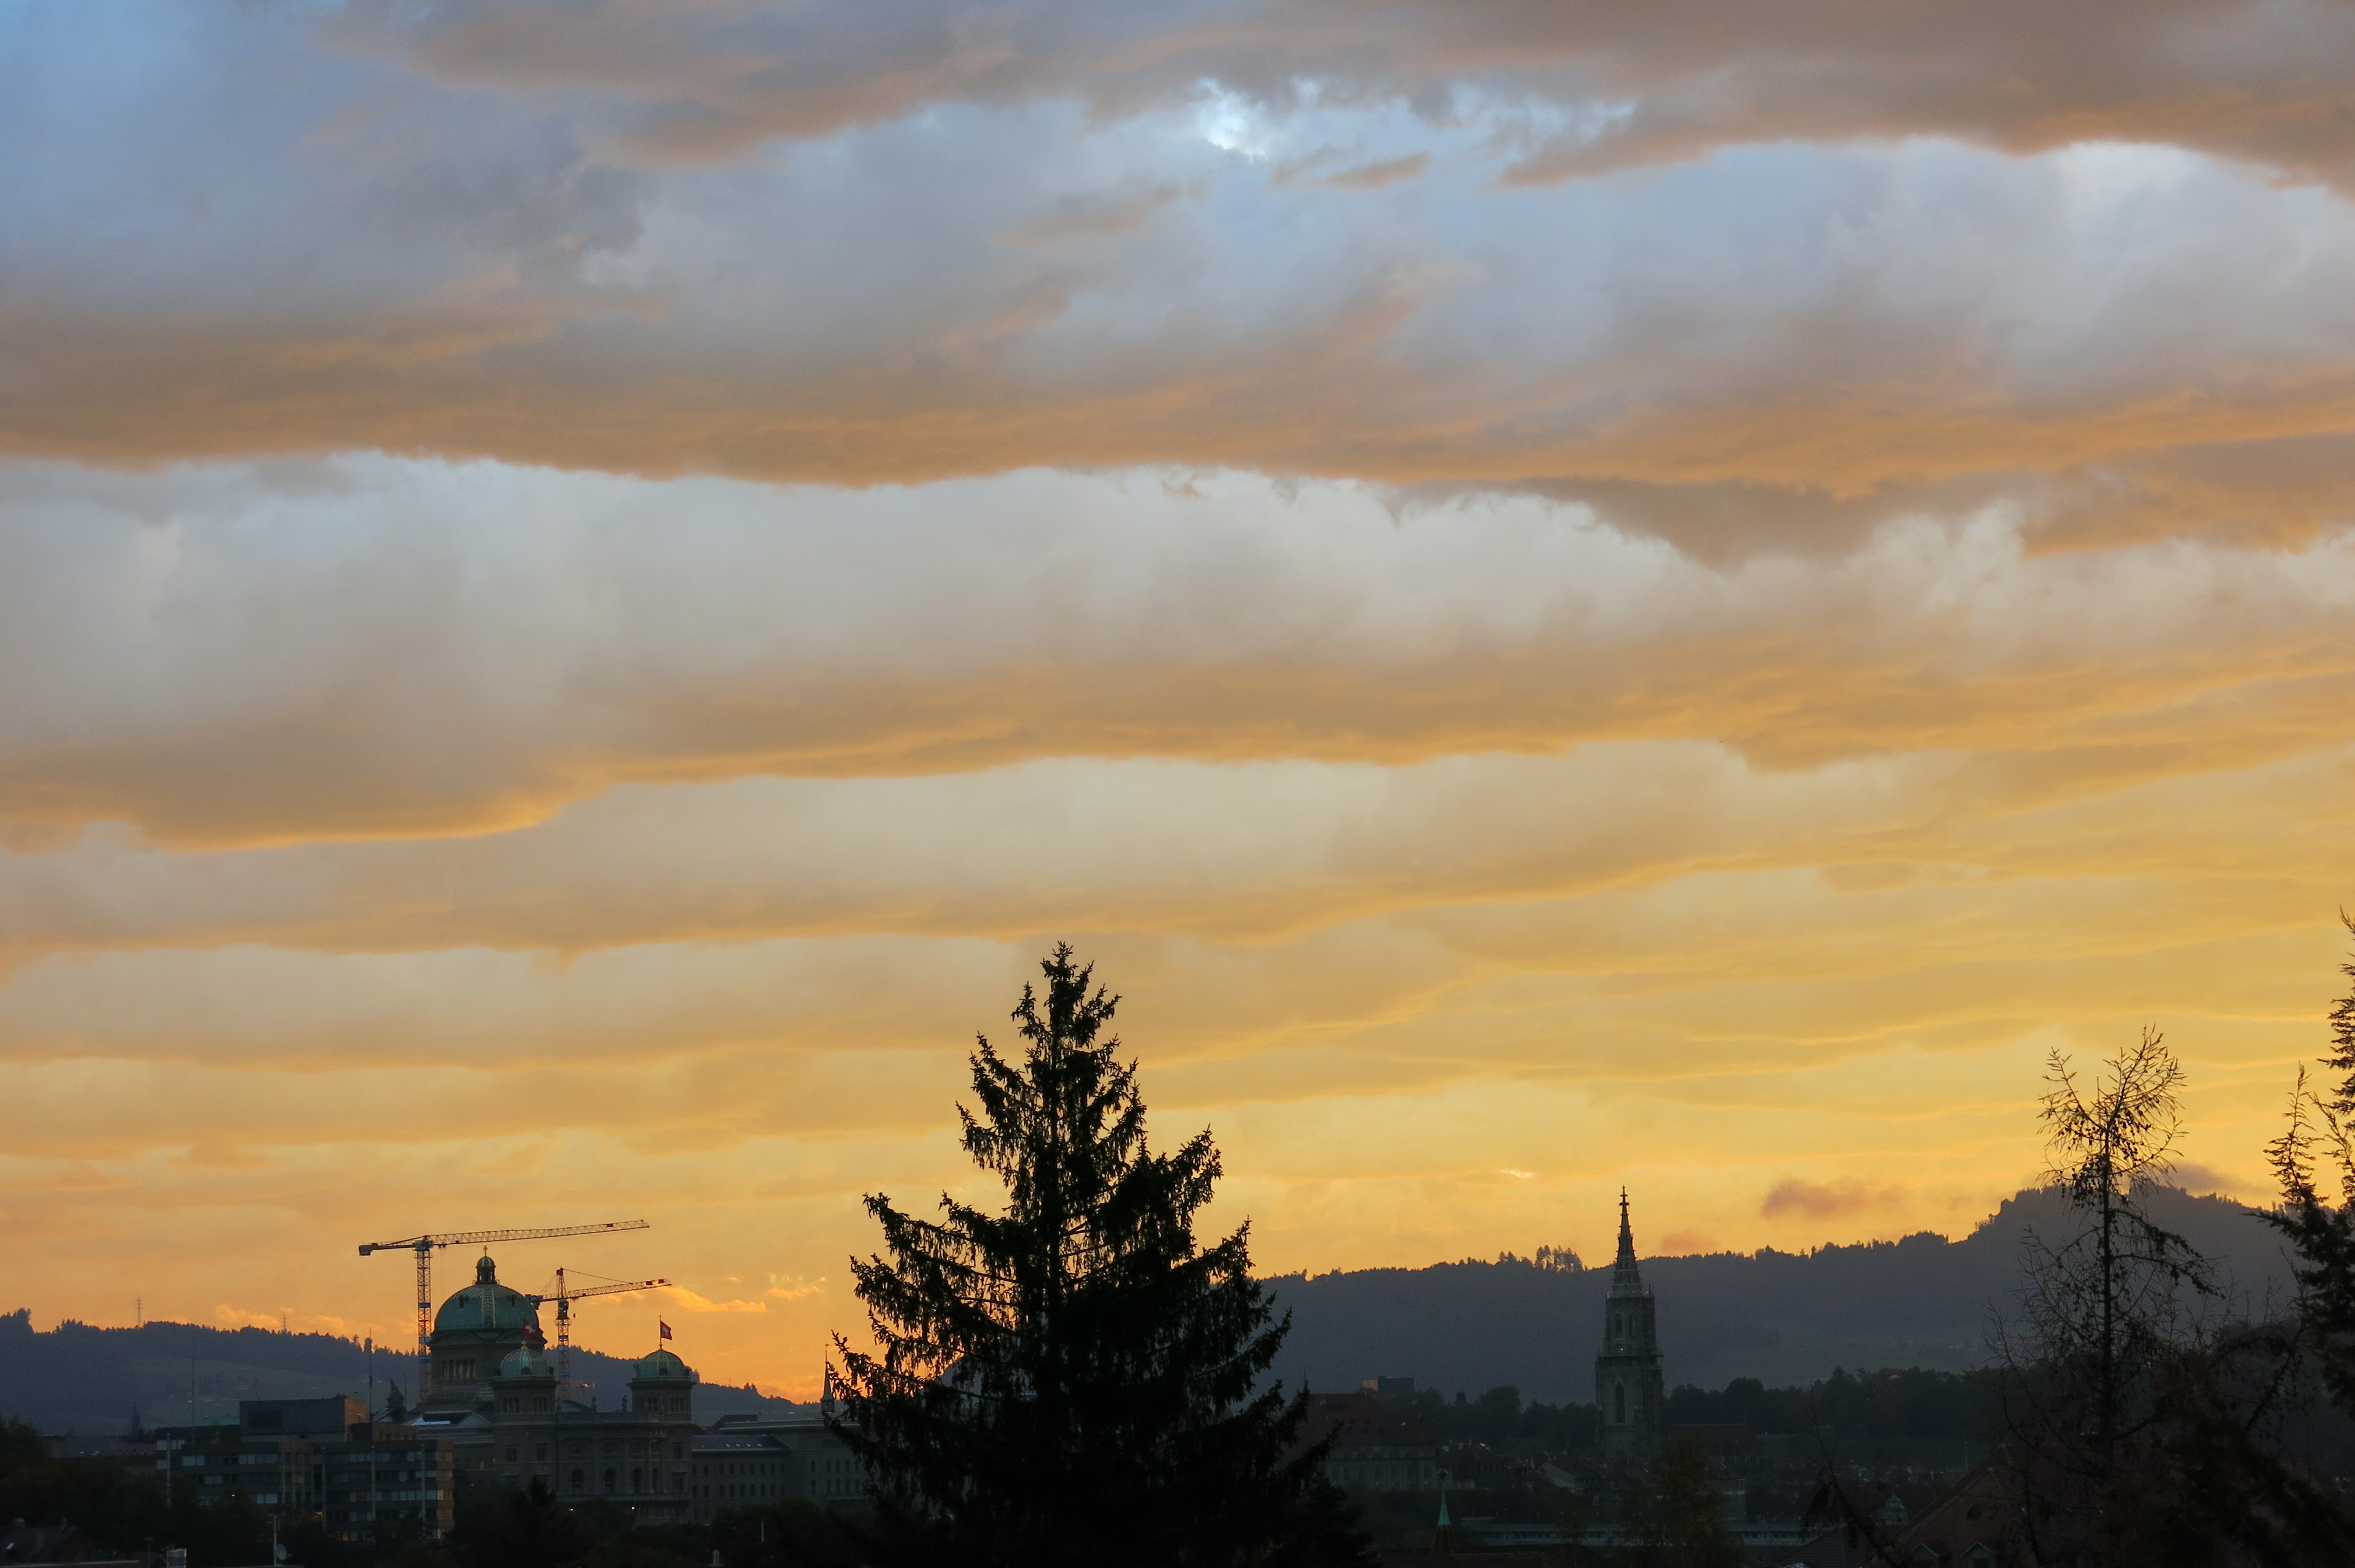 roll cloud, roll cloud picture, roll cloud asperatus undulatus, roll cloud october 2015, roll cloud bern october 2015, A series of mysterious clouds roll over Bern, Roll clouds mixed with Undulatus Asperatus, 